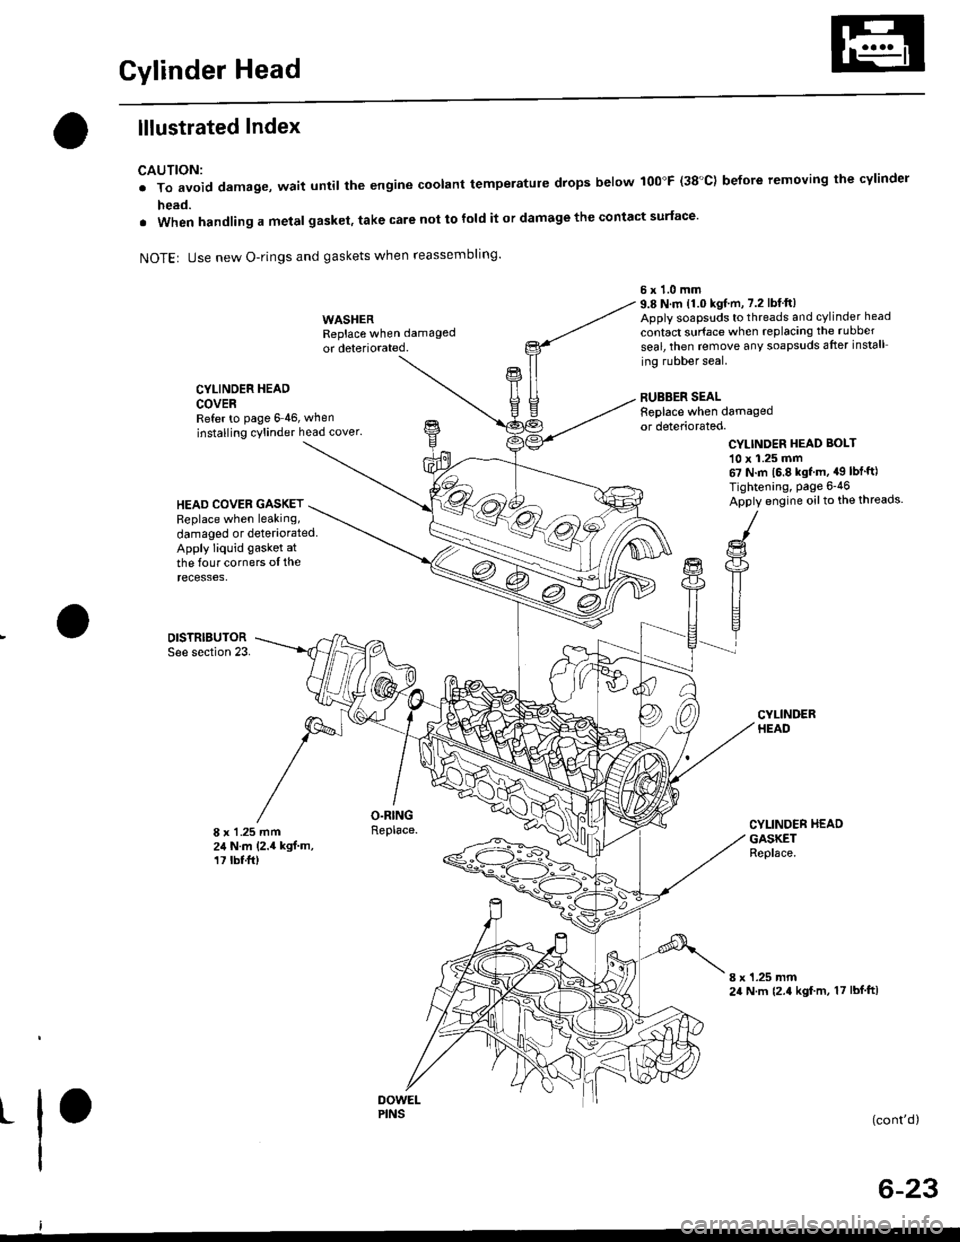 HONDA CIVIC 1998 6.G Workshop Manual Gylinder Head
lllustrated Index
CAUTION:
. To avoid damage, wait until the engine coolant temperatule drops below 100"F (38C) before removing the cylinder
head.
. When handling a metal gasket, take c